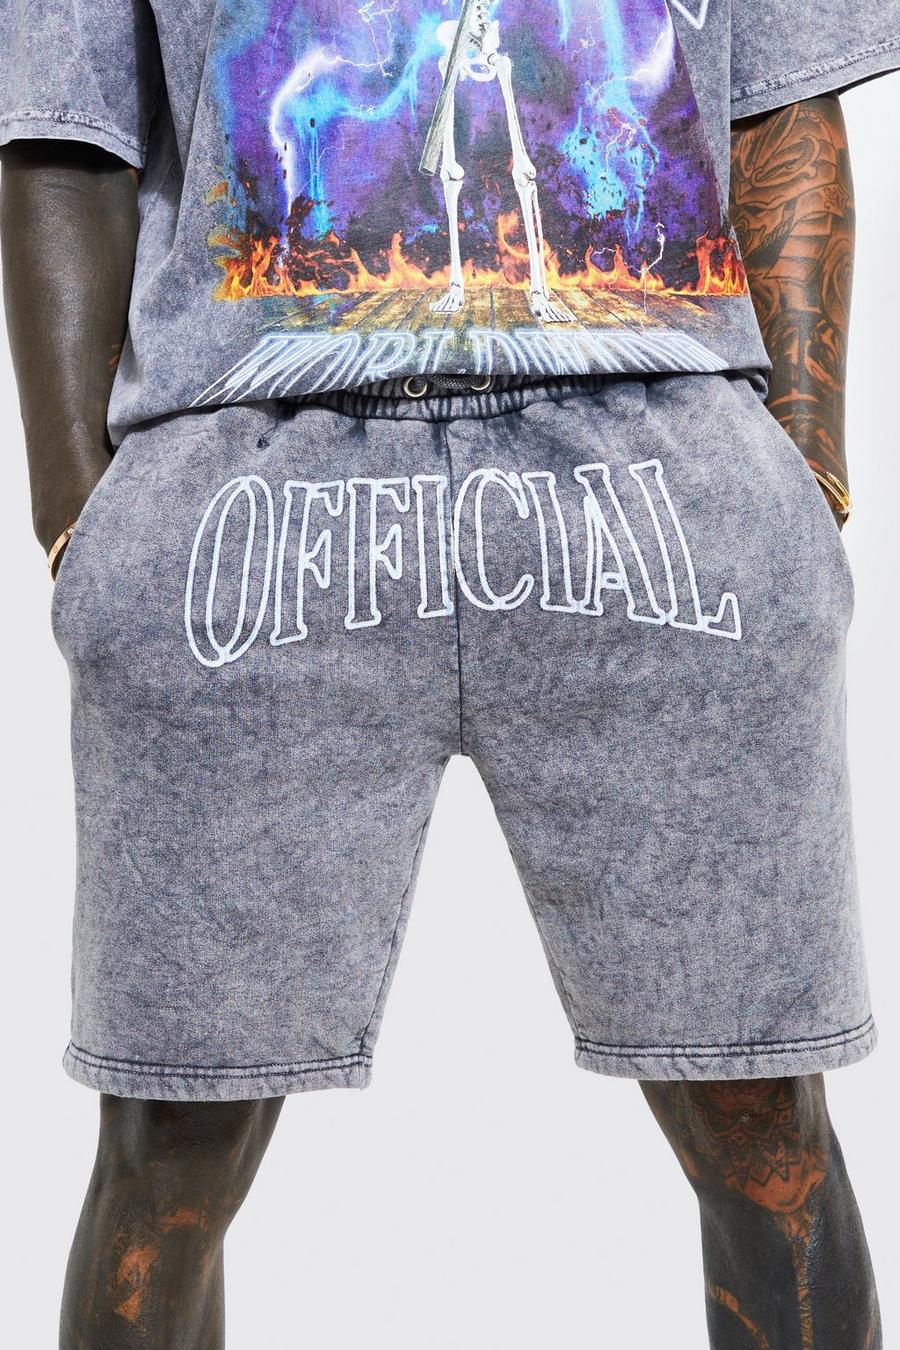 Lockere Official Shorts mit Acid-Waschung, Charcoal gris image number 1